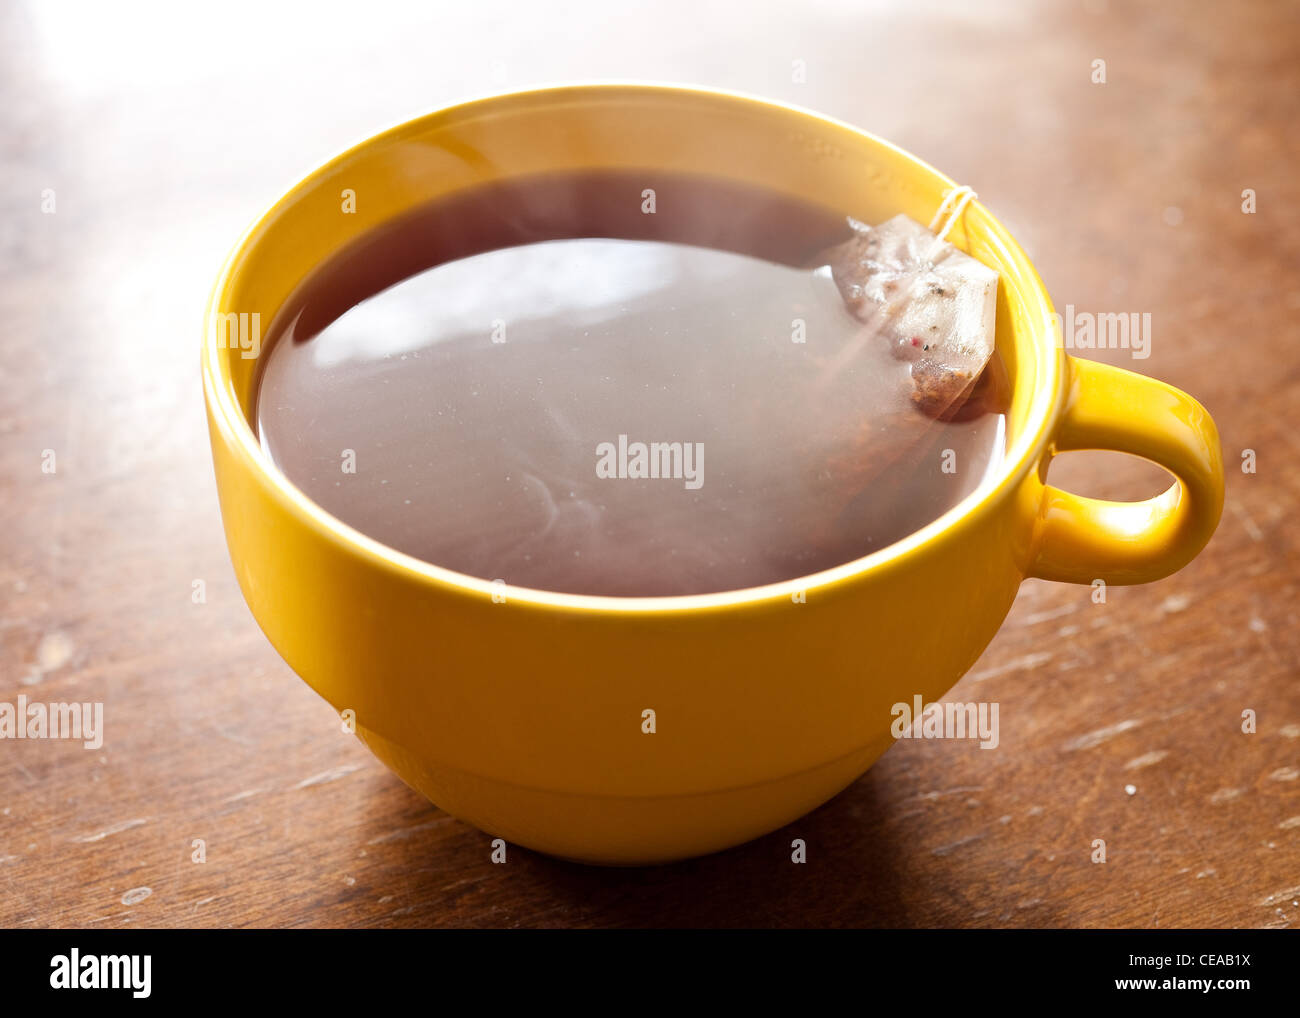 A cup of tea sitting on a table Stock Photo